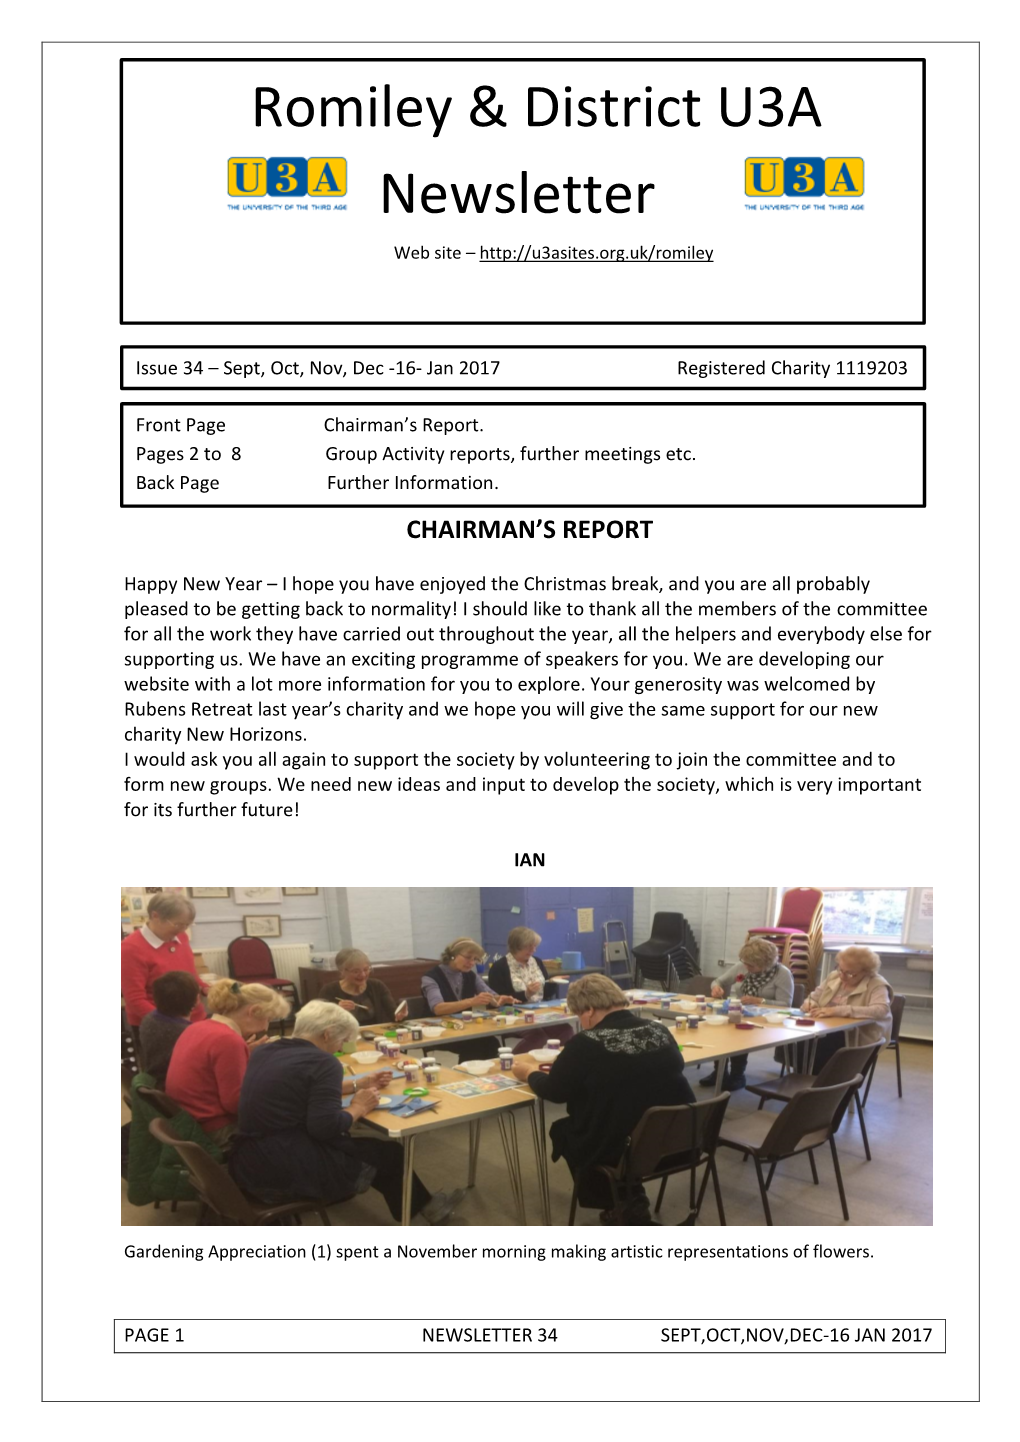 Romiley & District U3A Newsletter